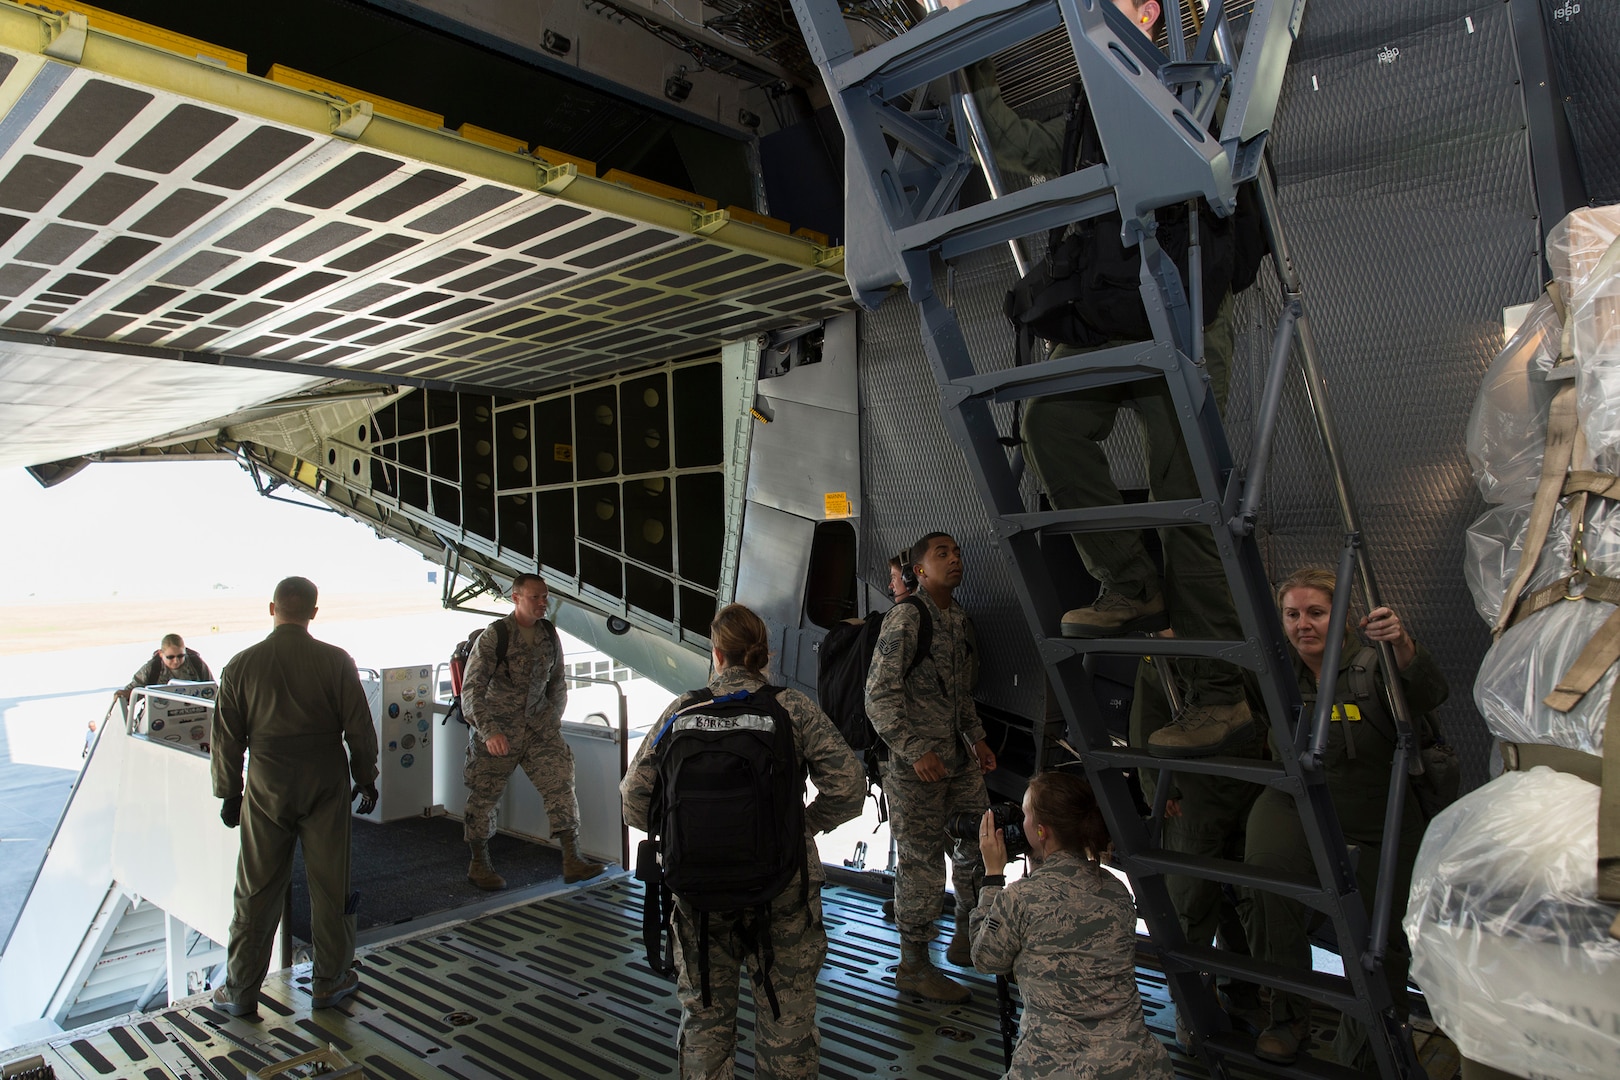 U.S. Air Force medical personnel board a military aircraft